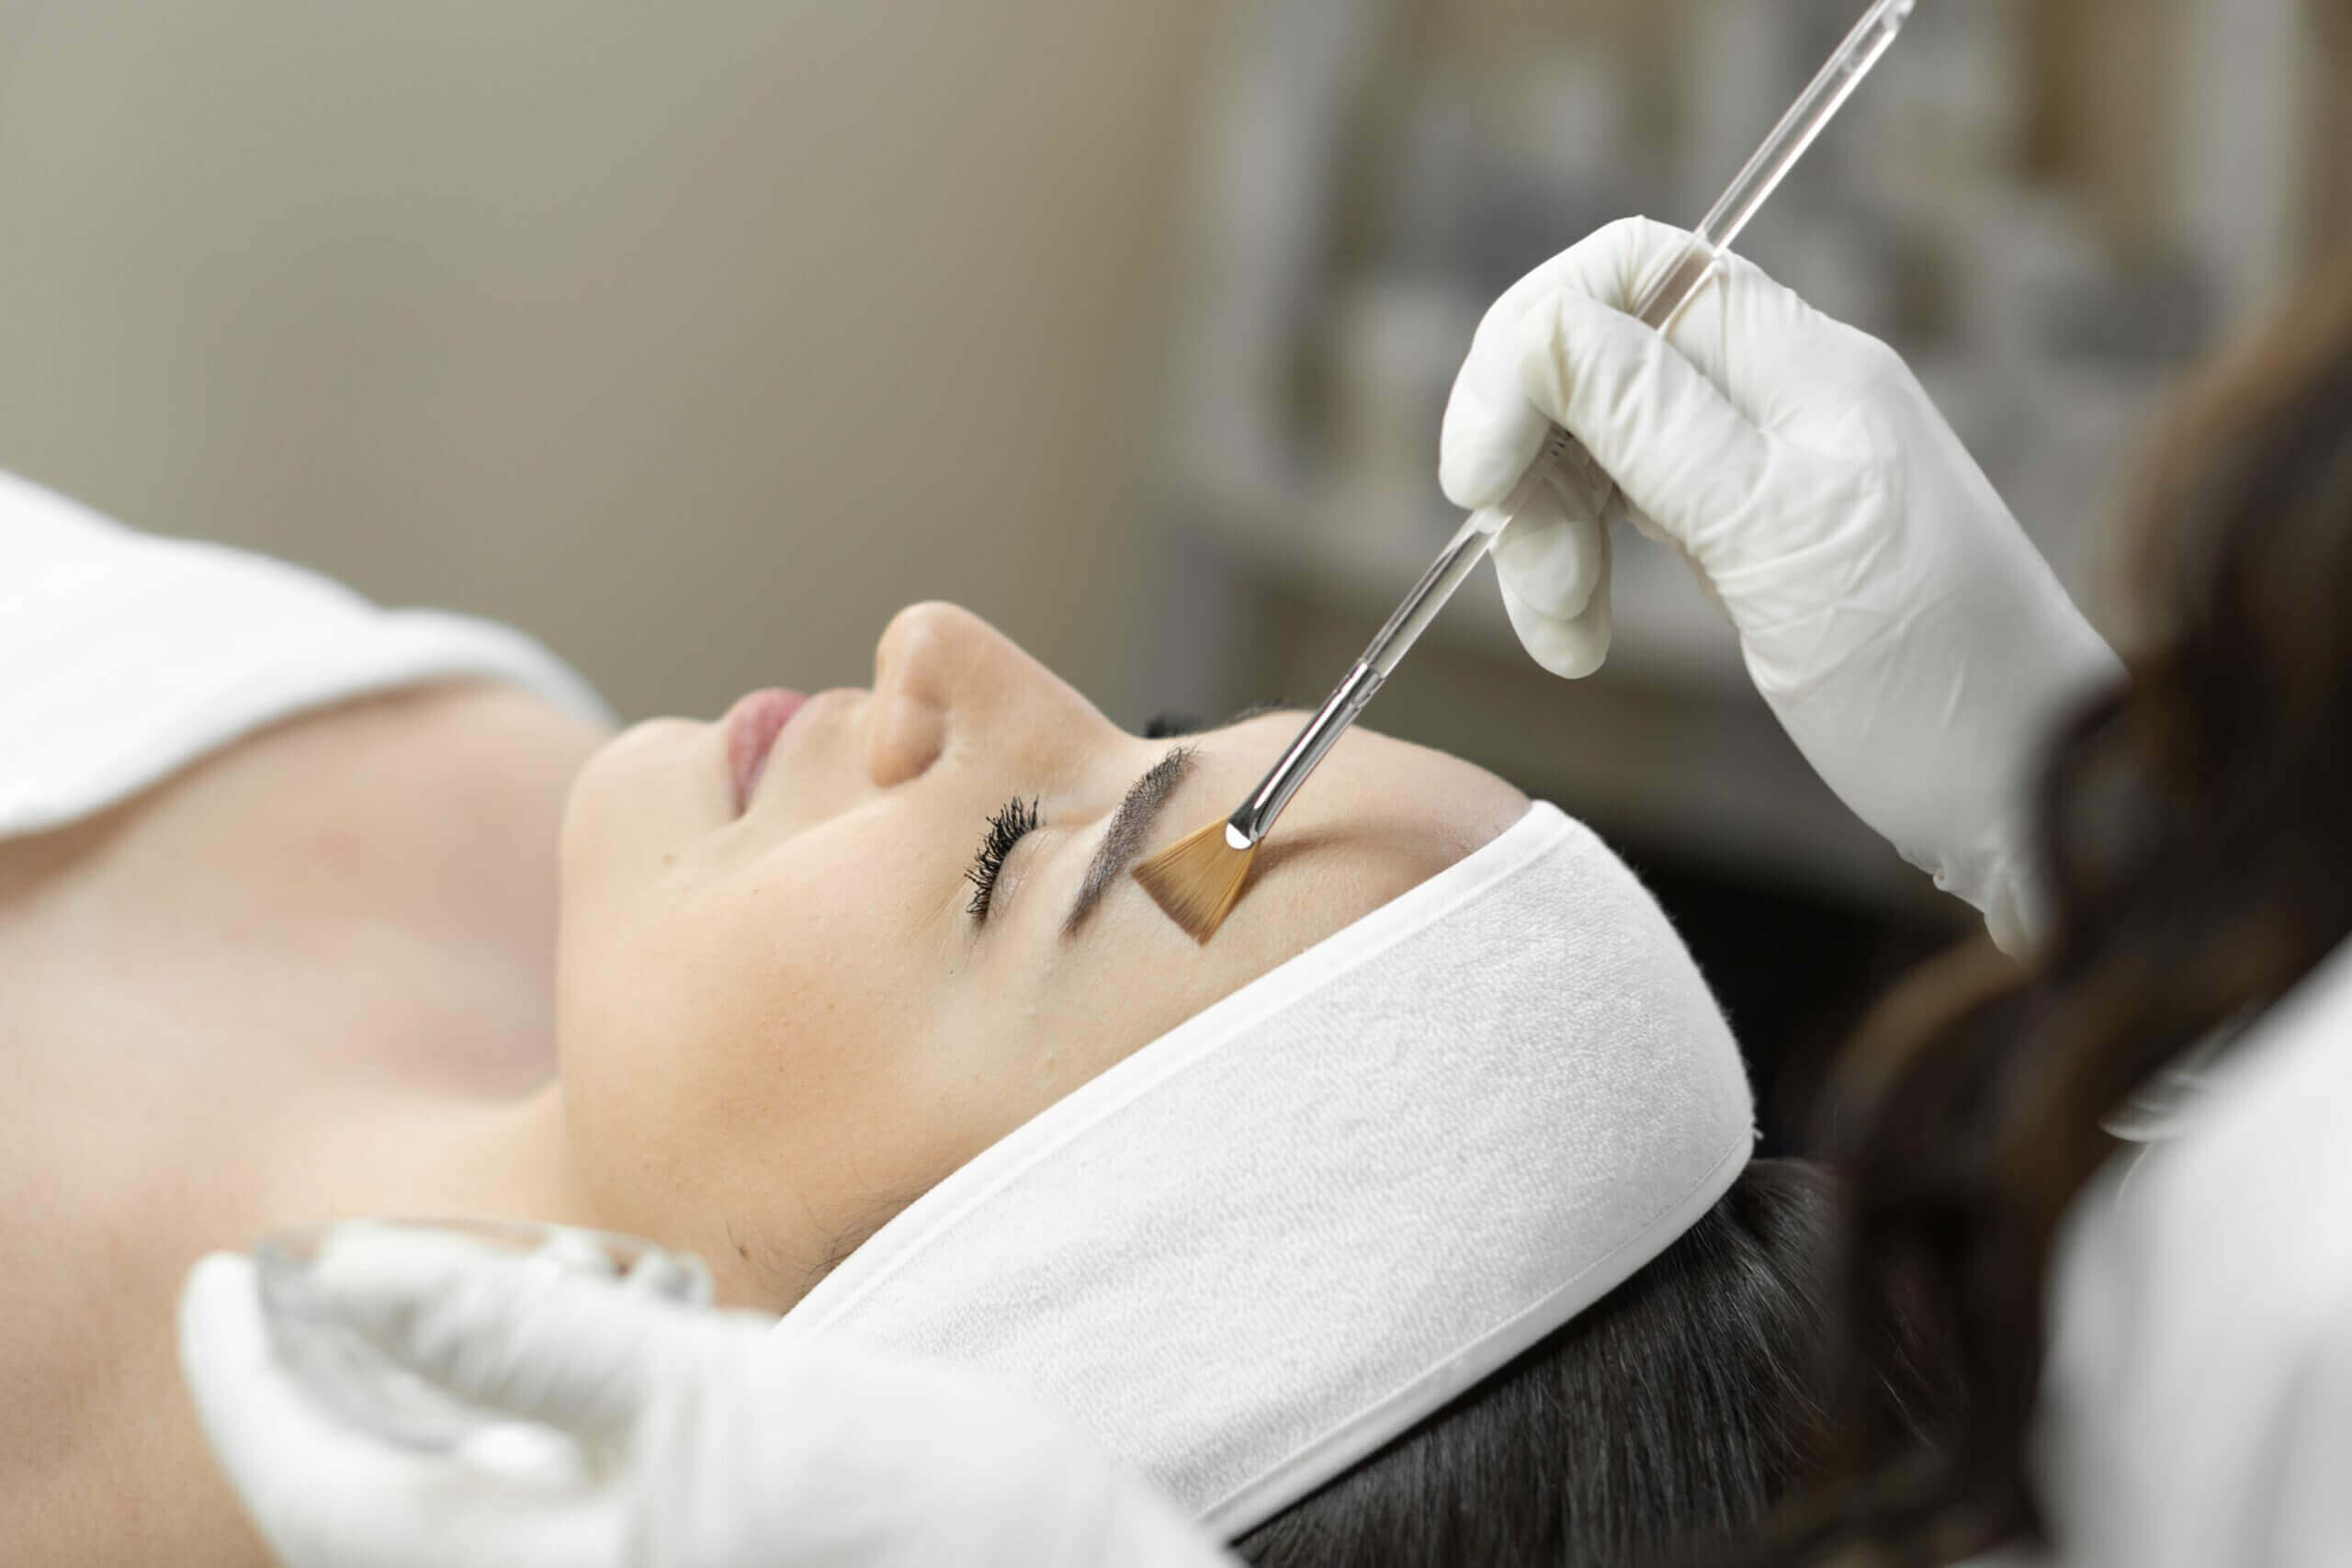 Chemical Peels by Glow Wellness Care in East Northport NY